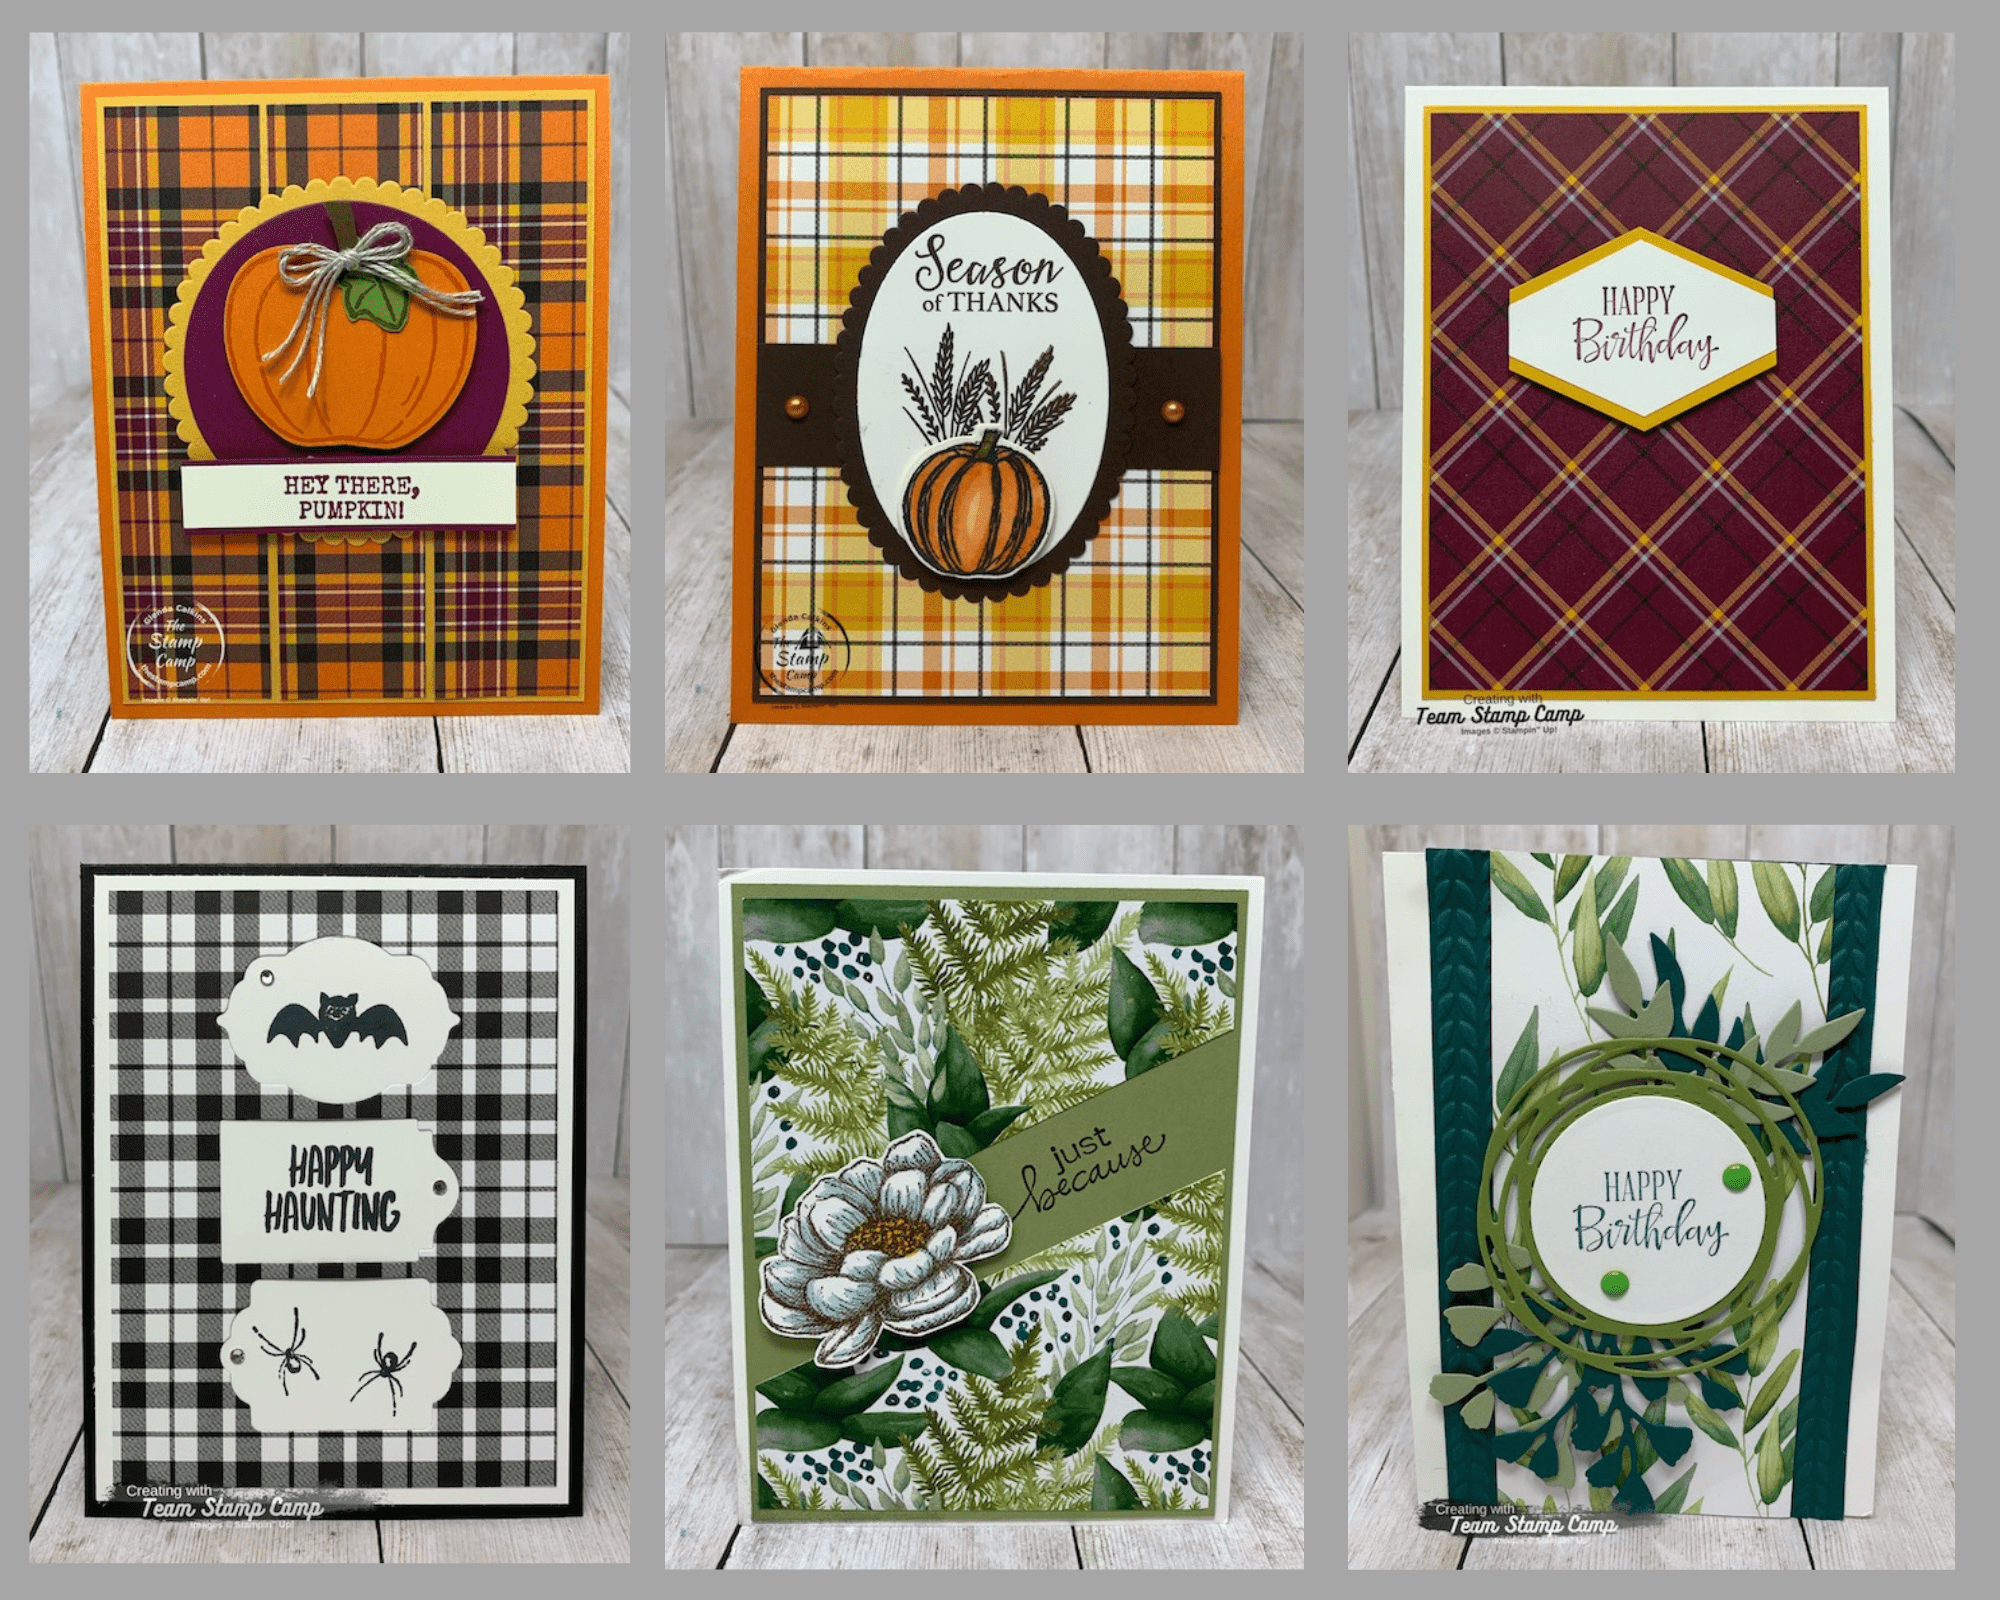 Designer Series Paper sale going on for the month of October 2020. During this sale you can get select Designer Series Paper packs at 15% off. See my blog here for the details: https://wp.me/p59VWq-bvs. #stampinup #designerpaper #thestampcamp